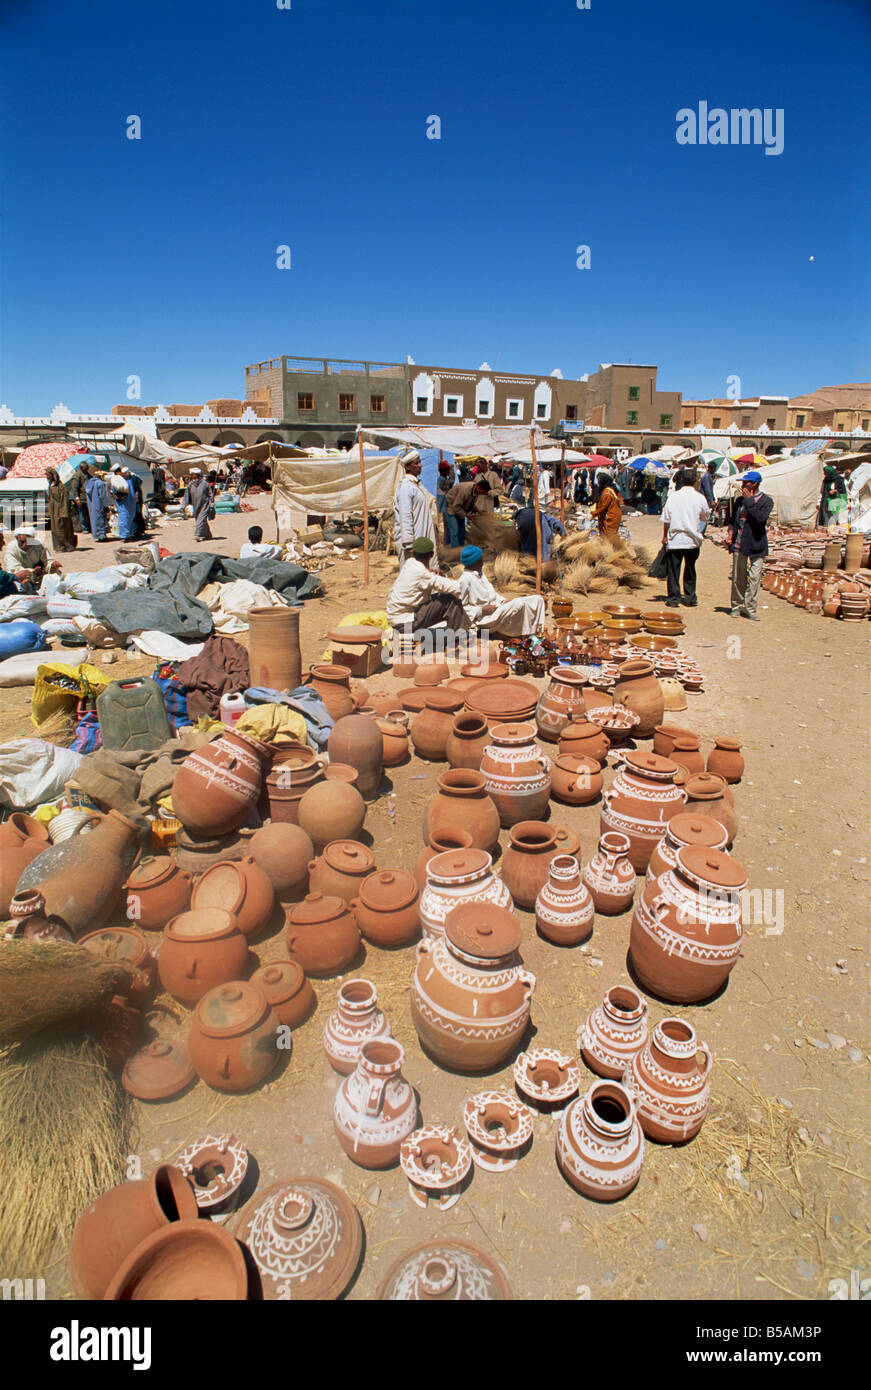 Market scene Tinejdad Morocco Africa R H Productions Stock Photo